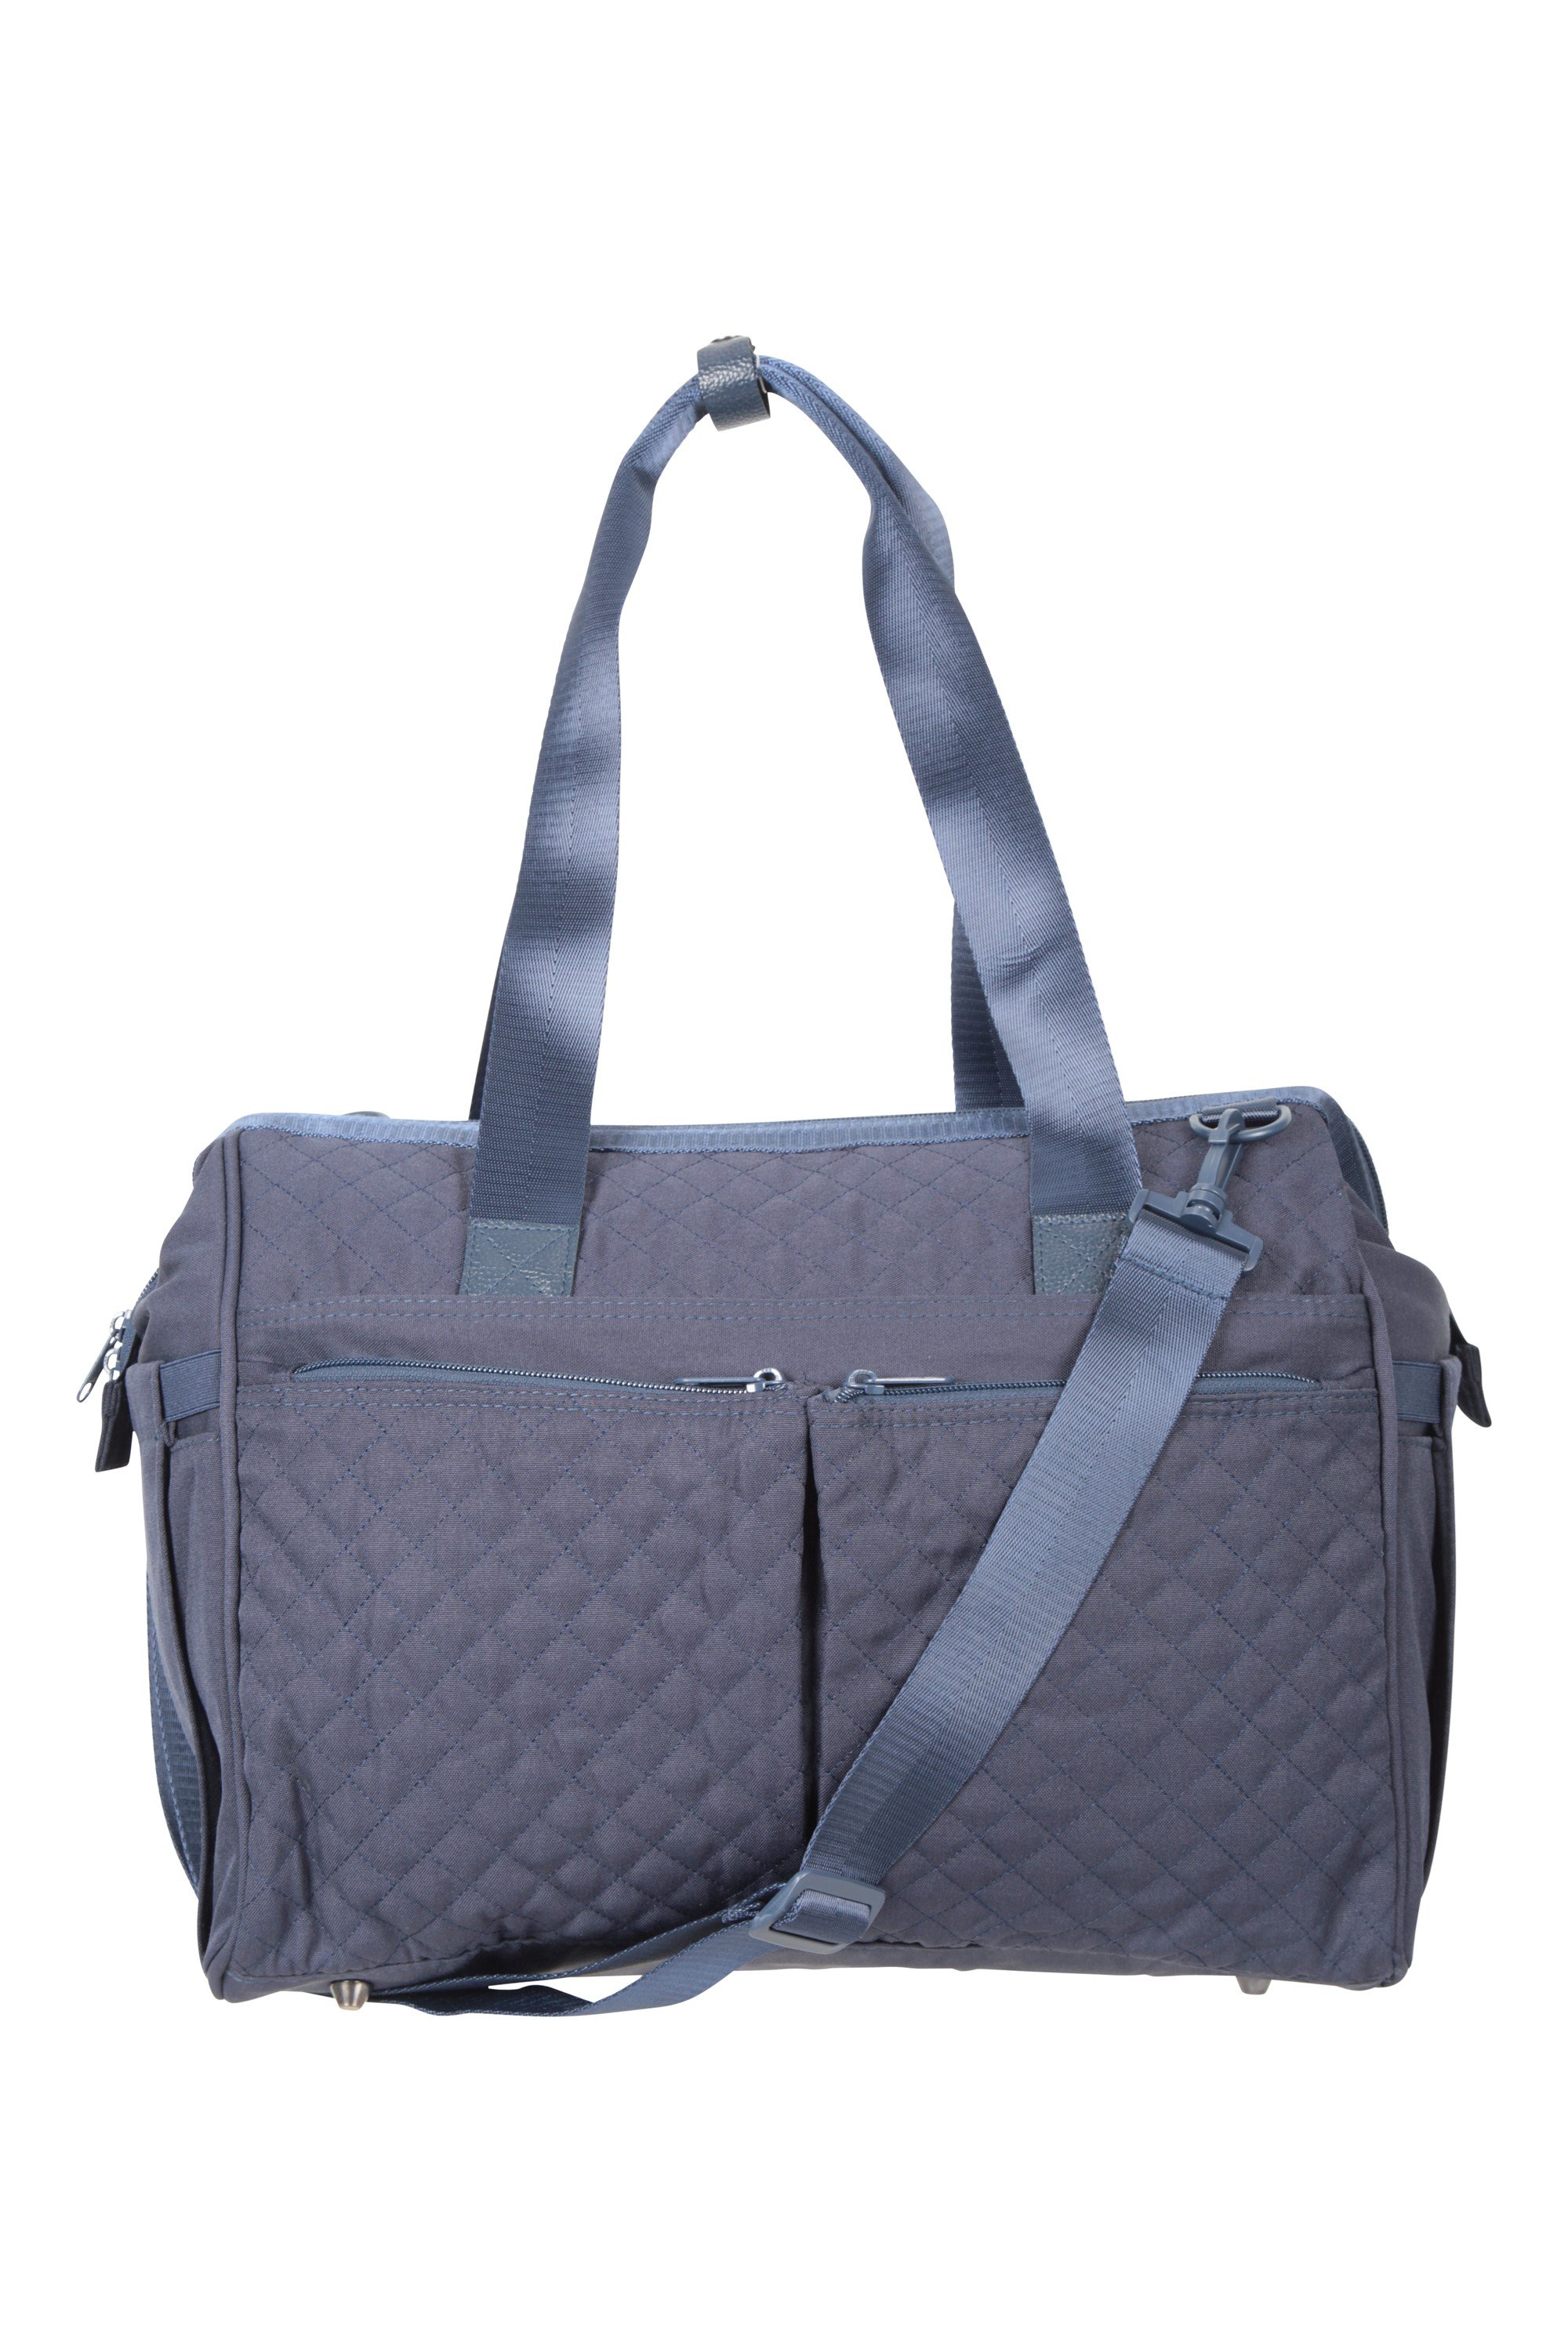 Baby Changing Tote Bag - 25L - Blue